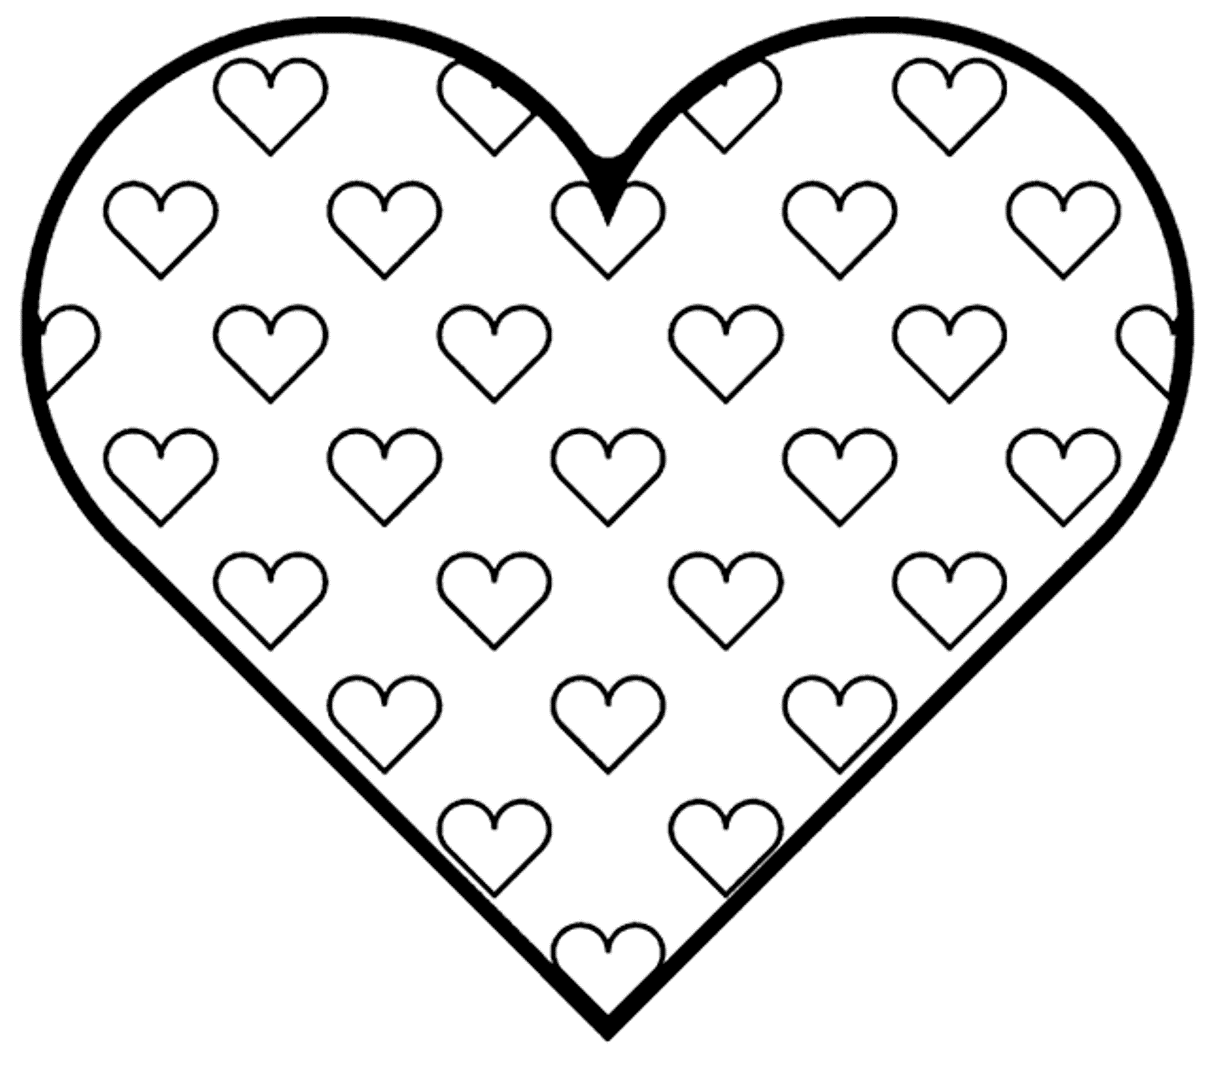 Big Love Valentine Coloring Pages | Valentine Coloring pages of ...